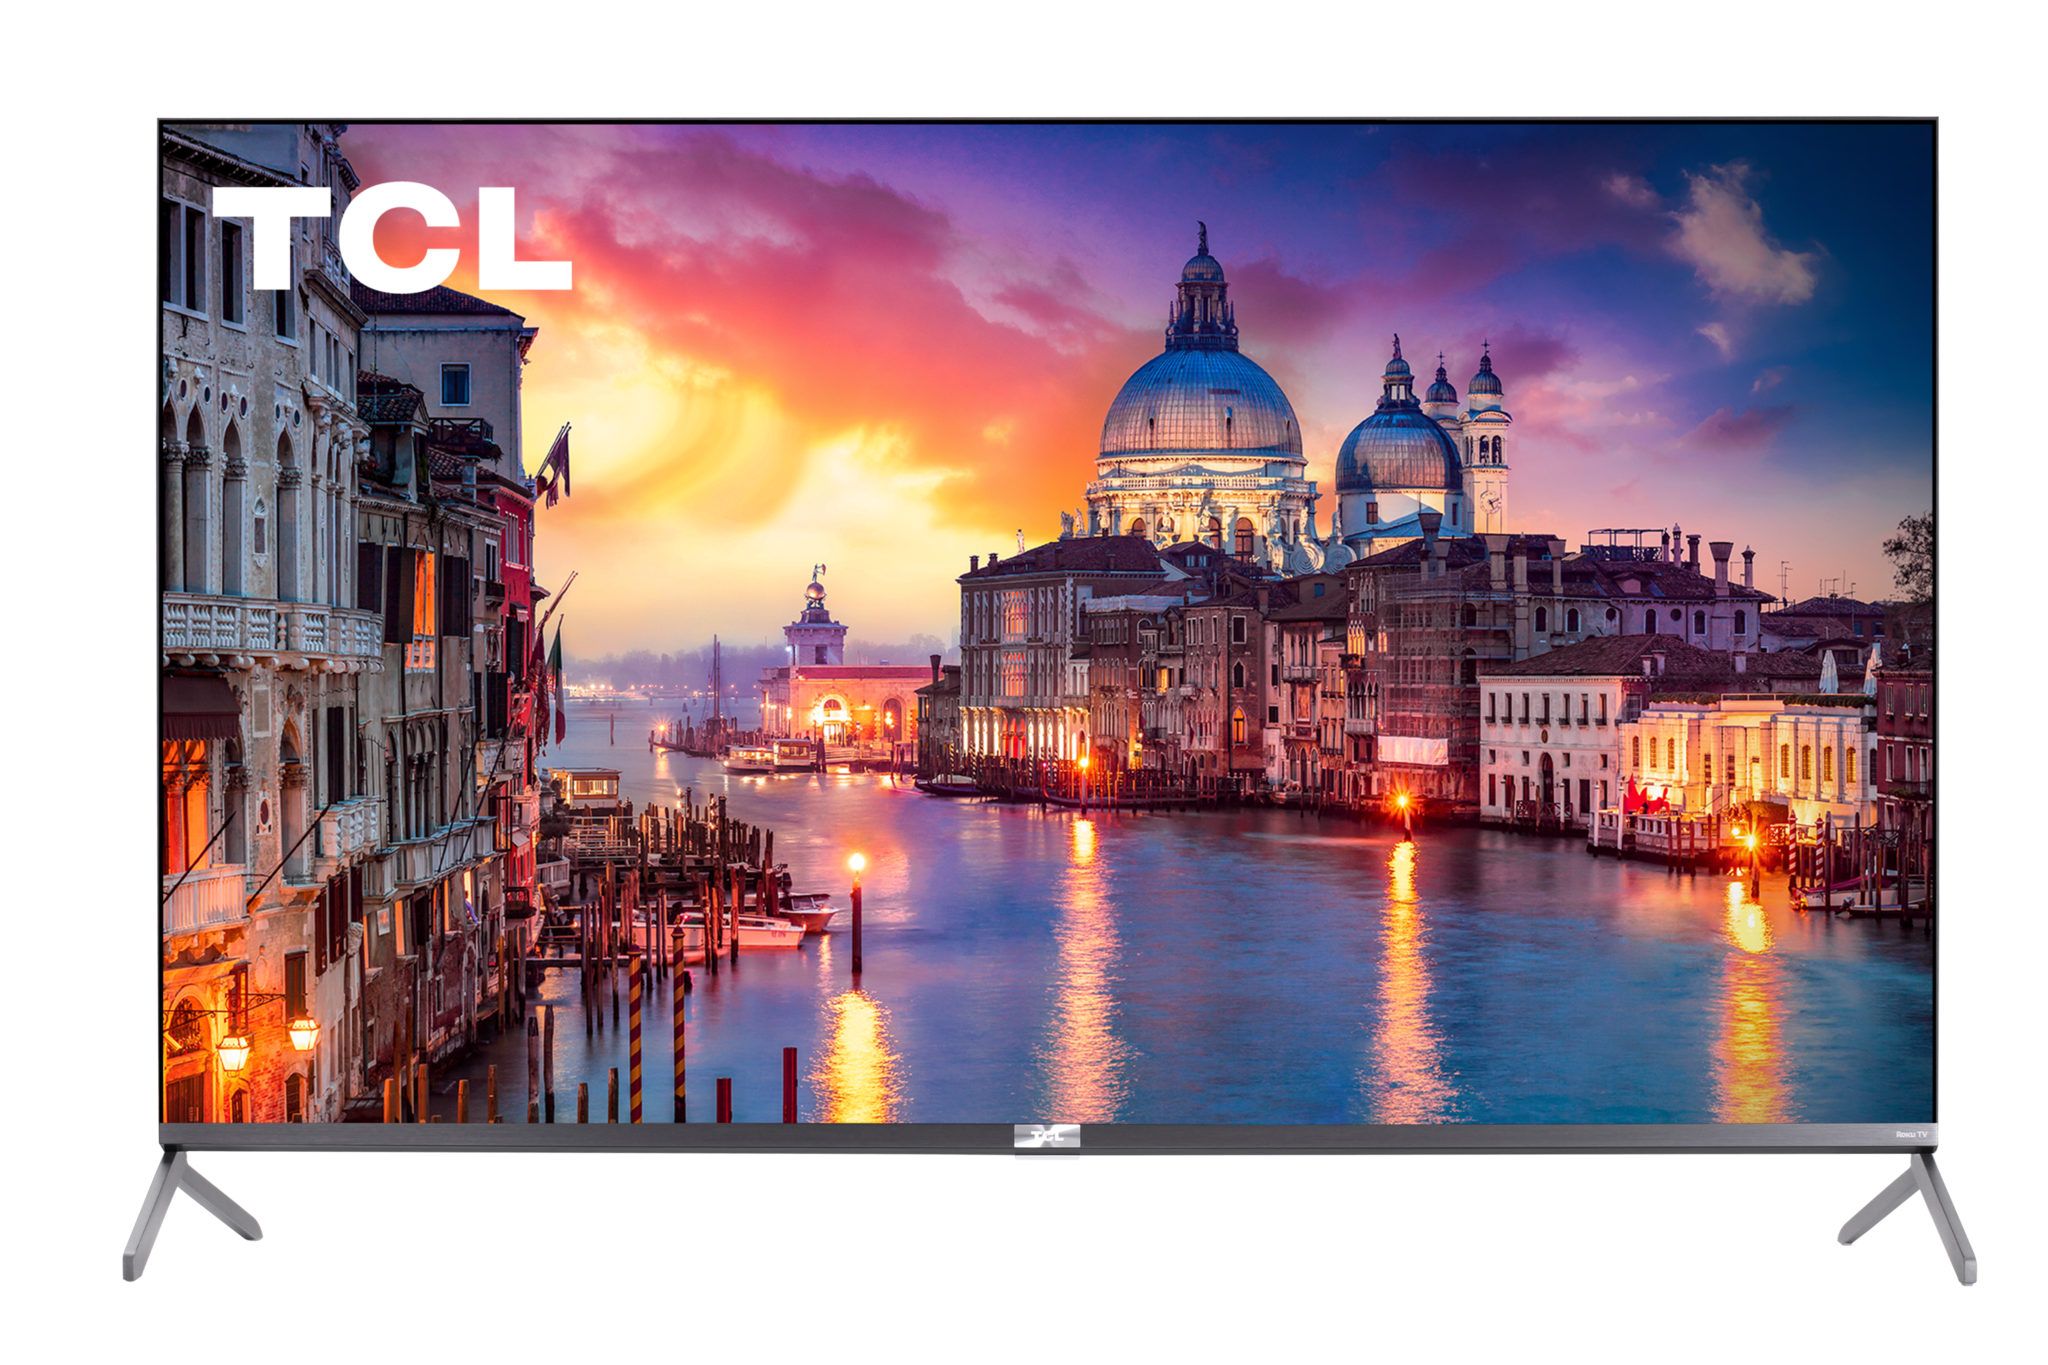 Review: Is TCL’s 2019 6-Series Roku TV Still The Best TV Under $1,000?